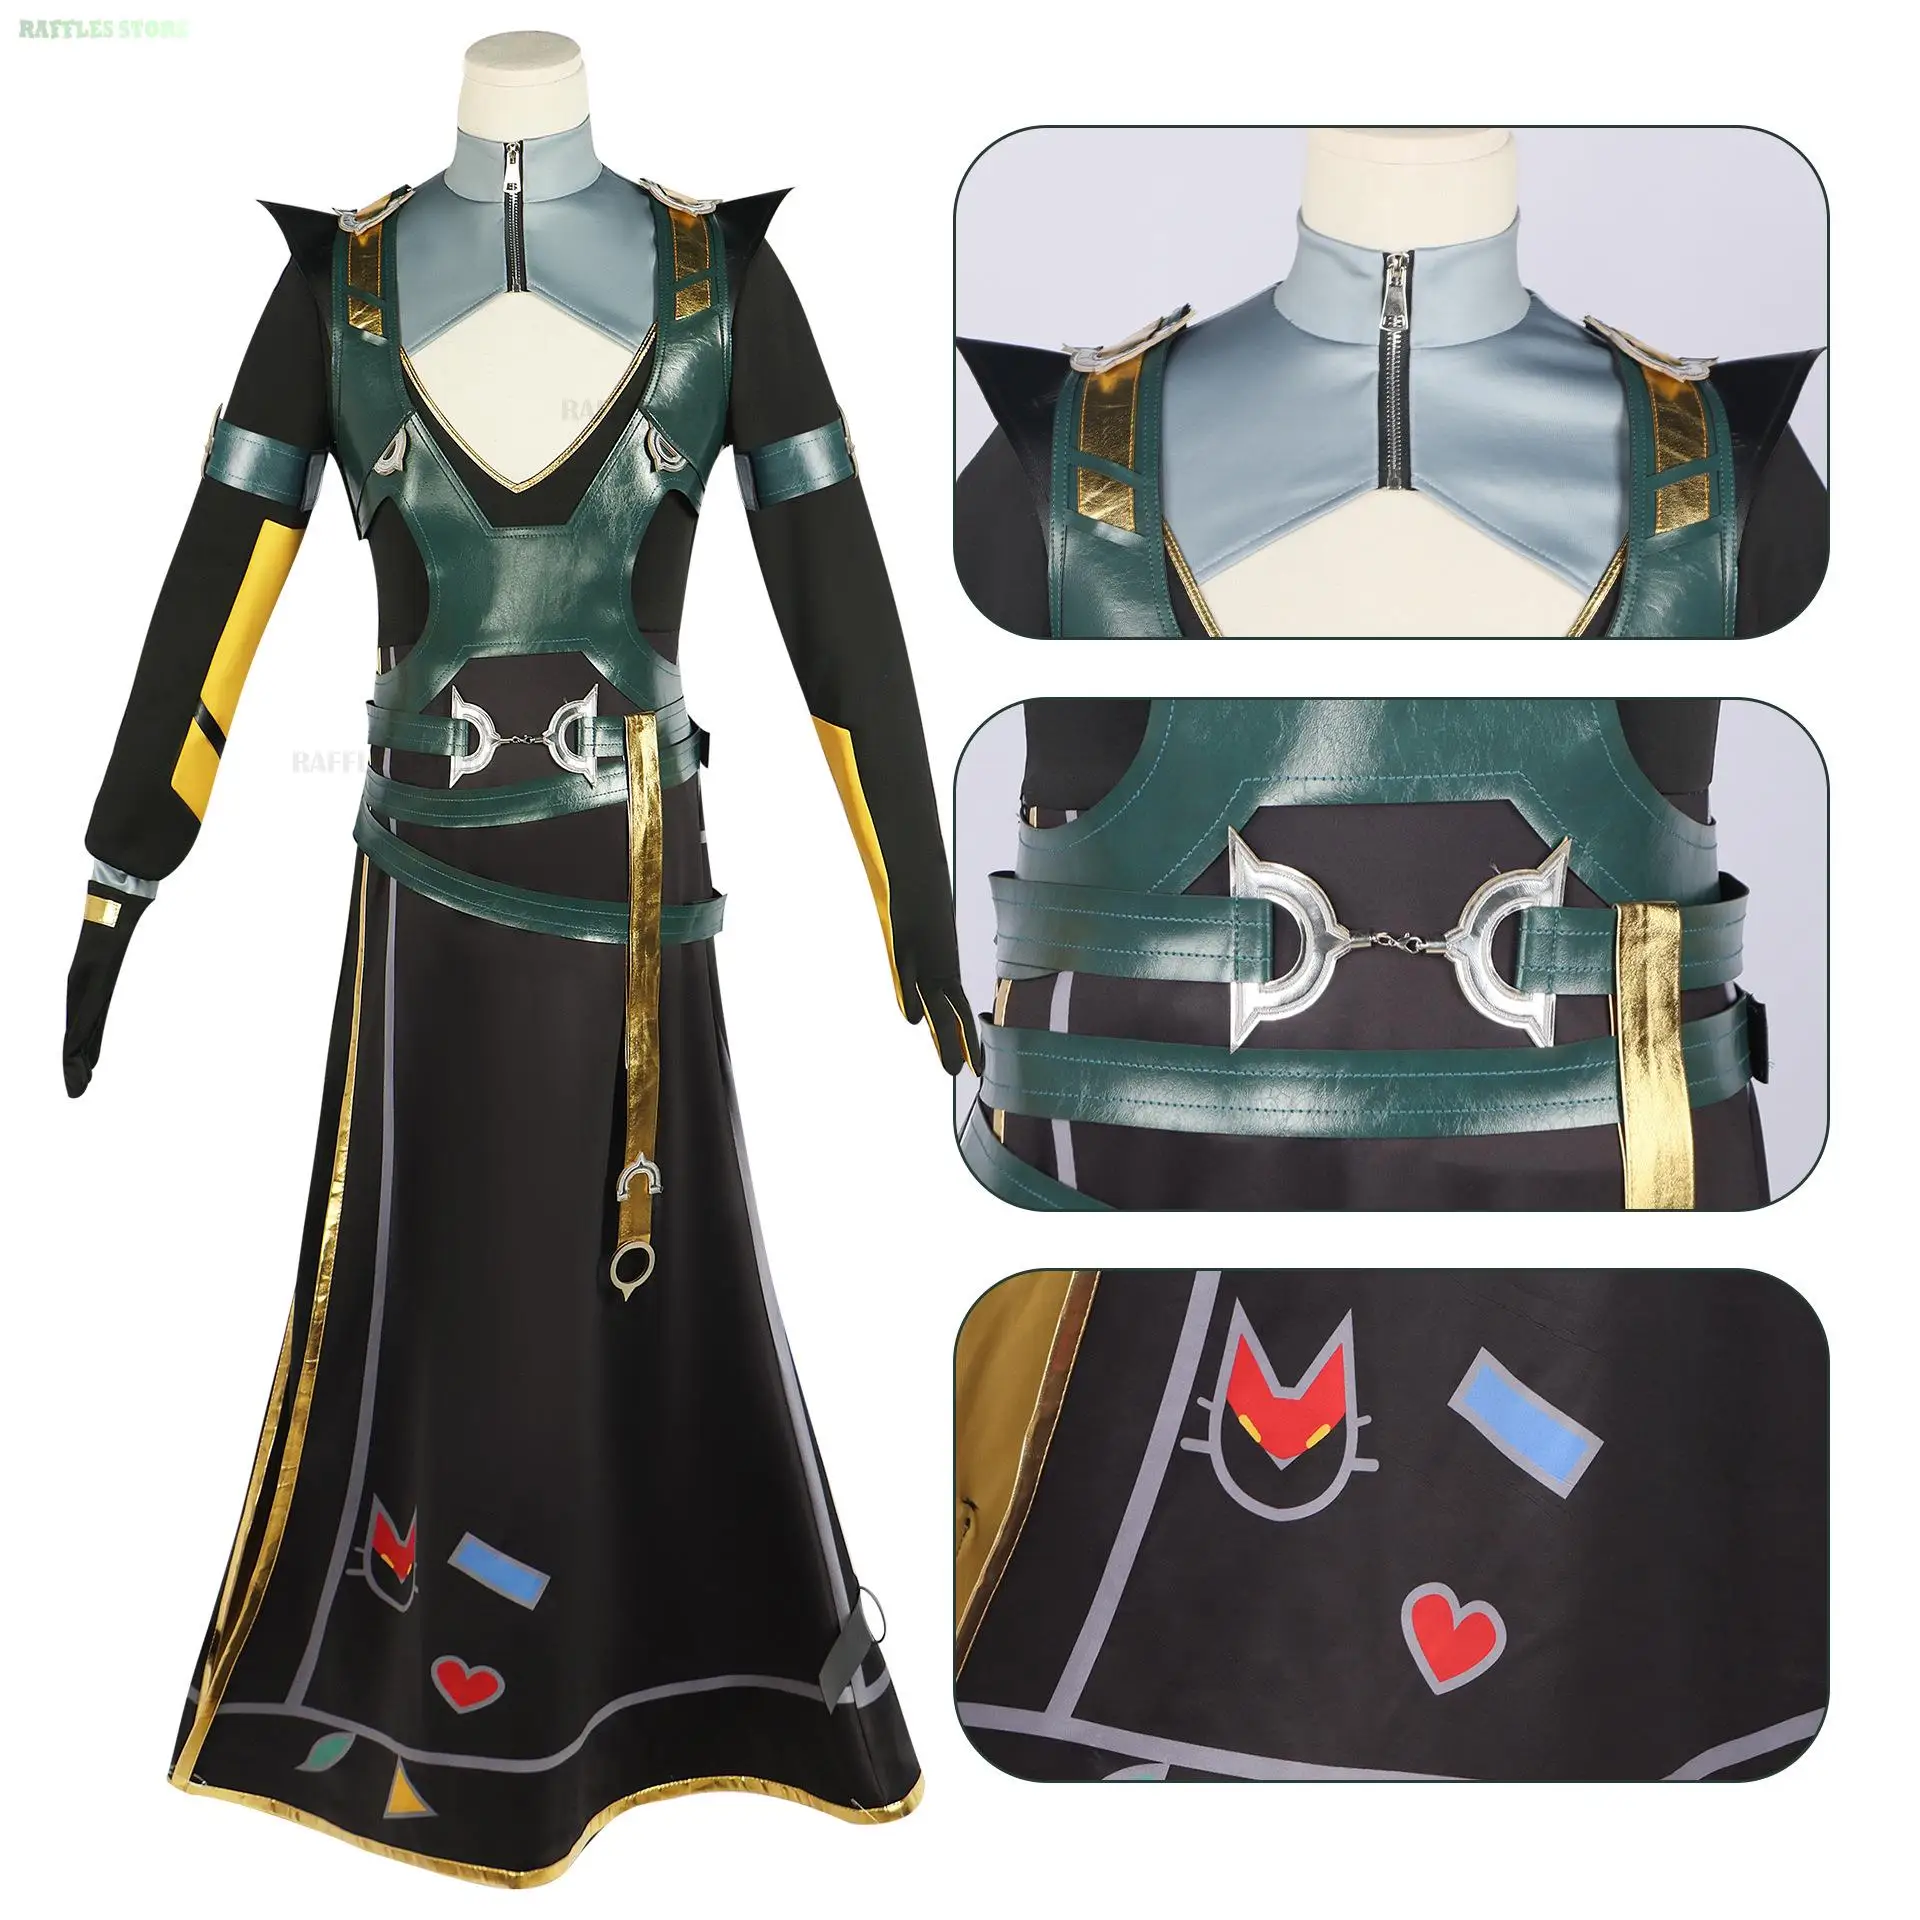 

LOL HEARTSTEEL Yone Cosplay Costume Team Skin Anime Game Lengends Cosplay Halloween Party Event Outfit Mens Yone Suit Uniform